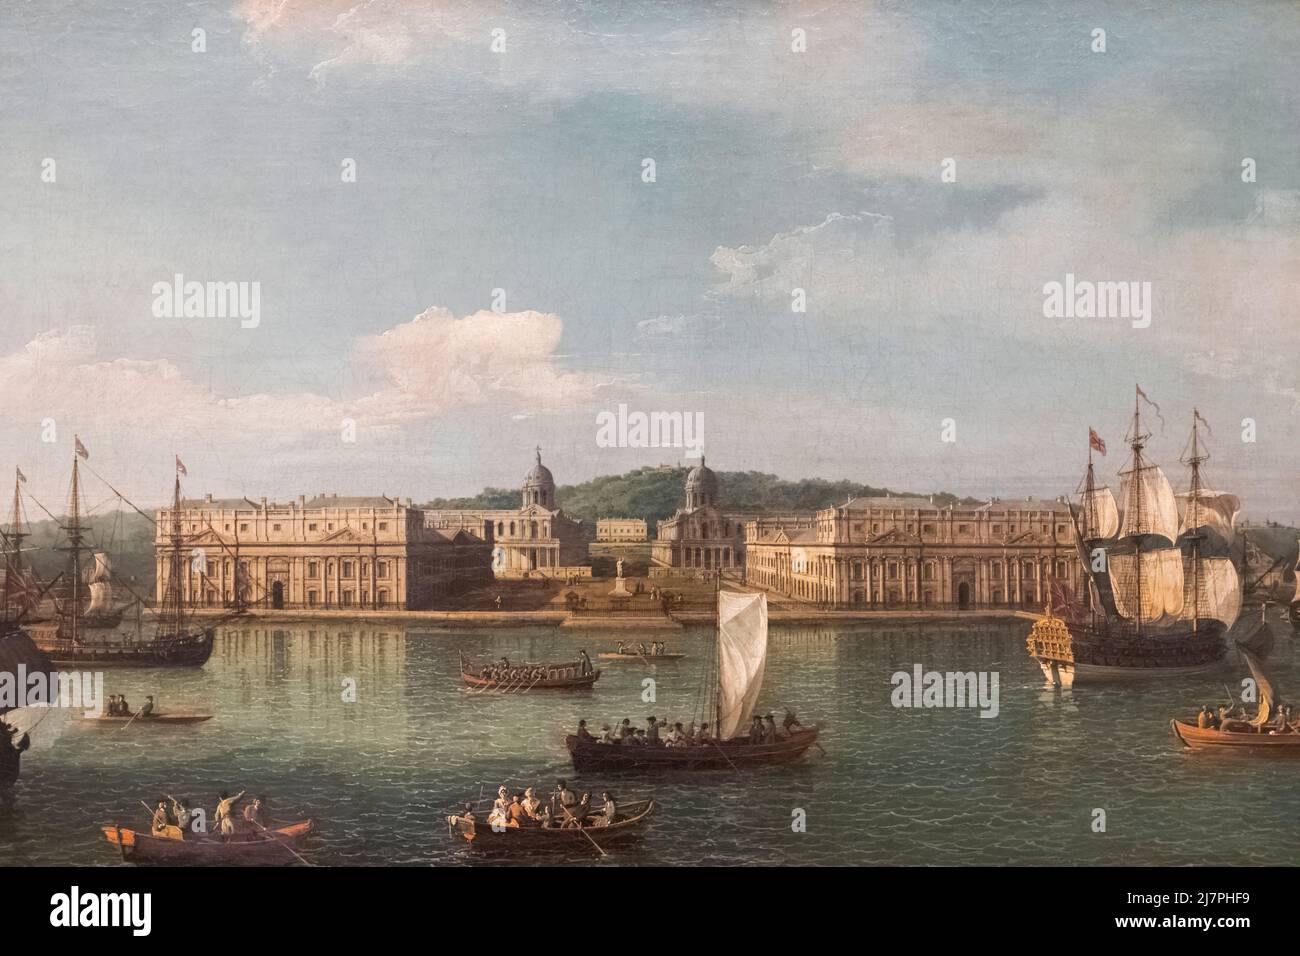 Painting titled 'A View of Greenwich from the River' by Canaletto dated 1750 Stock Photo